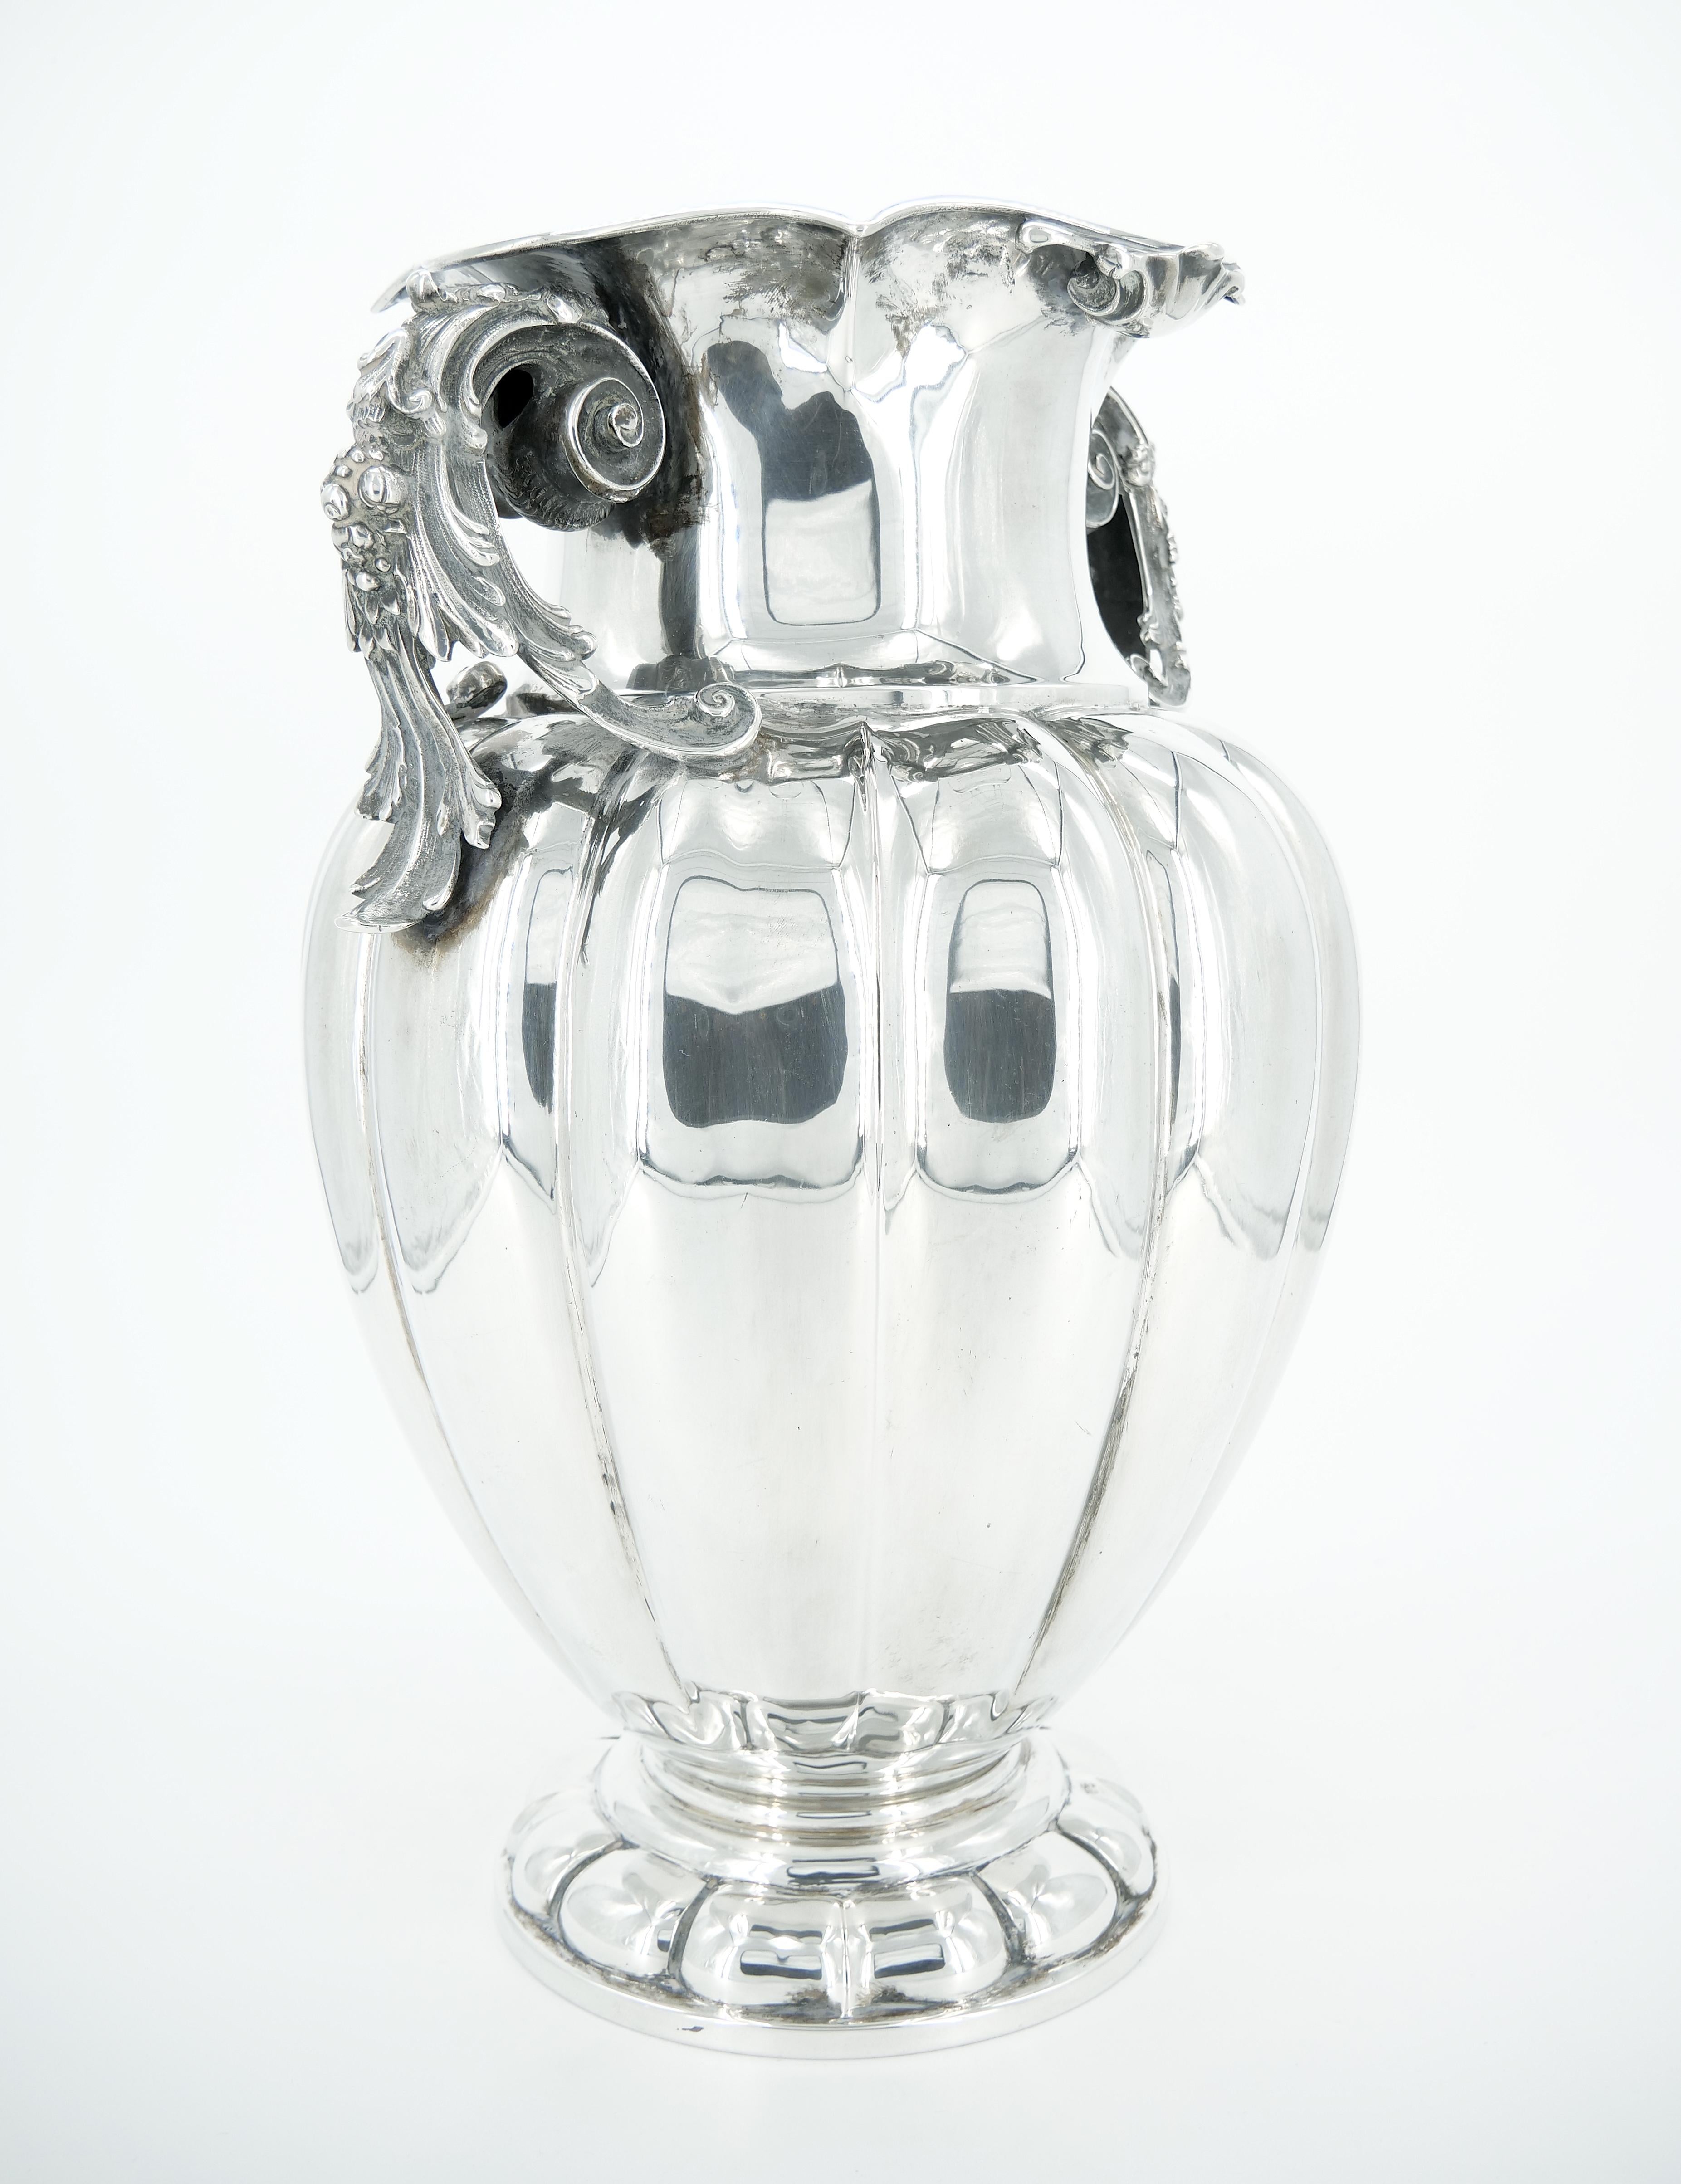 Introducing a magnificent find from the early 19th century – a sizable Italian Sterling Silver Two-Handled Vase or Decorative Piece, an epitome of grandeur and craftsmanship. This remarkable piece features an exterior adorned with intricate swirled